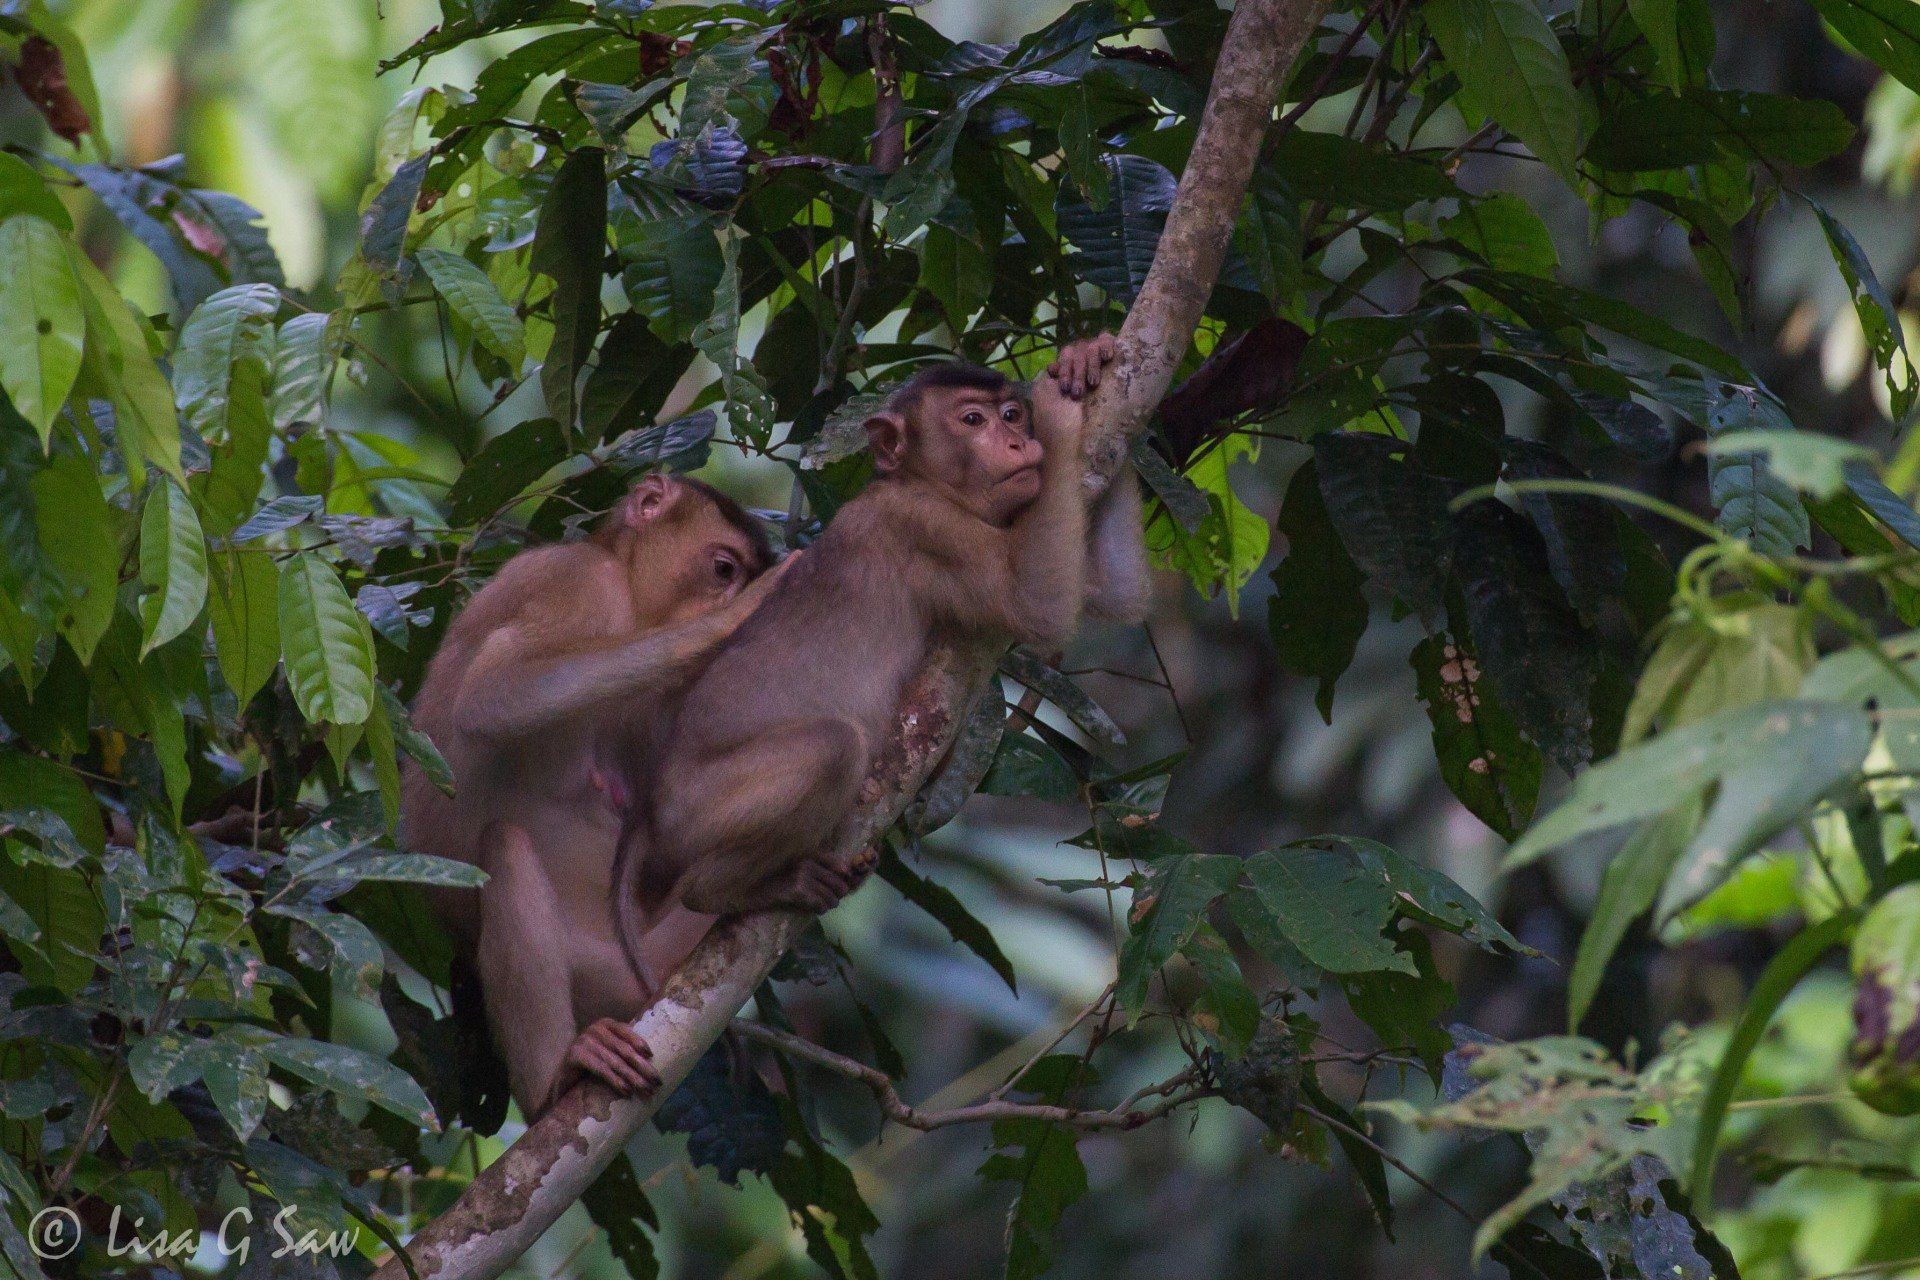 Two Long-Tailed Macaques grooming, Sepilok